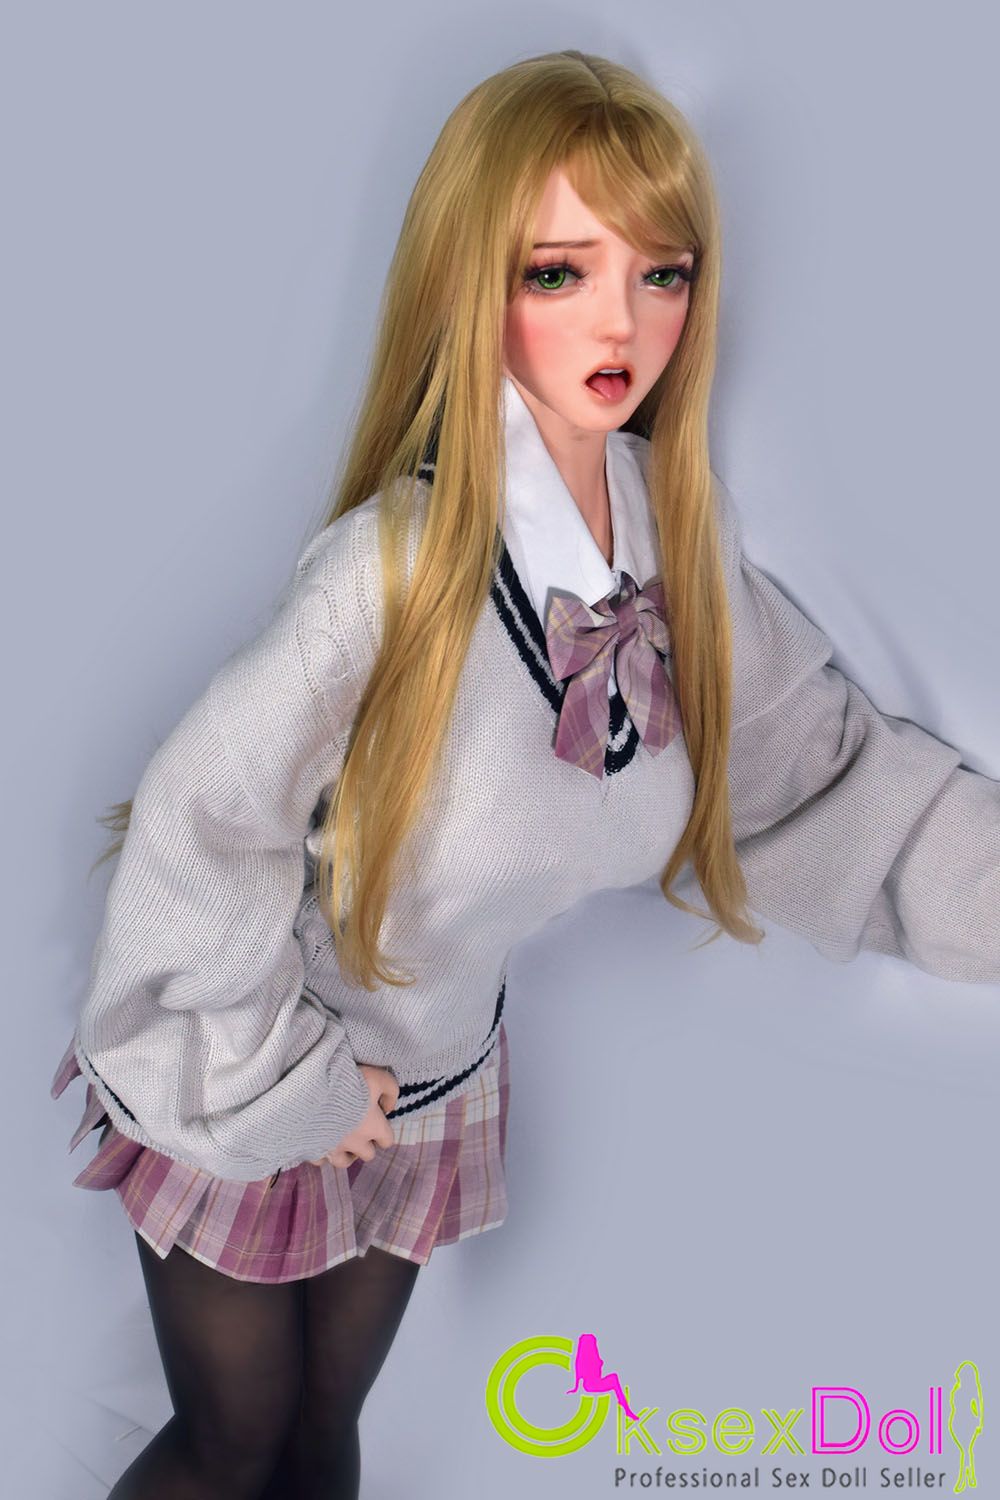 elsababe-doll.html Love Dolls Pictures